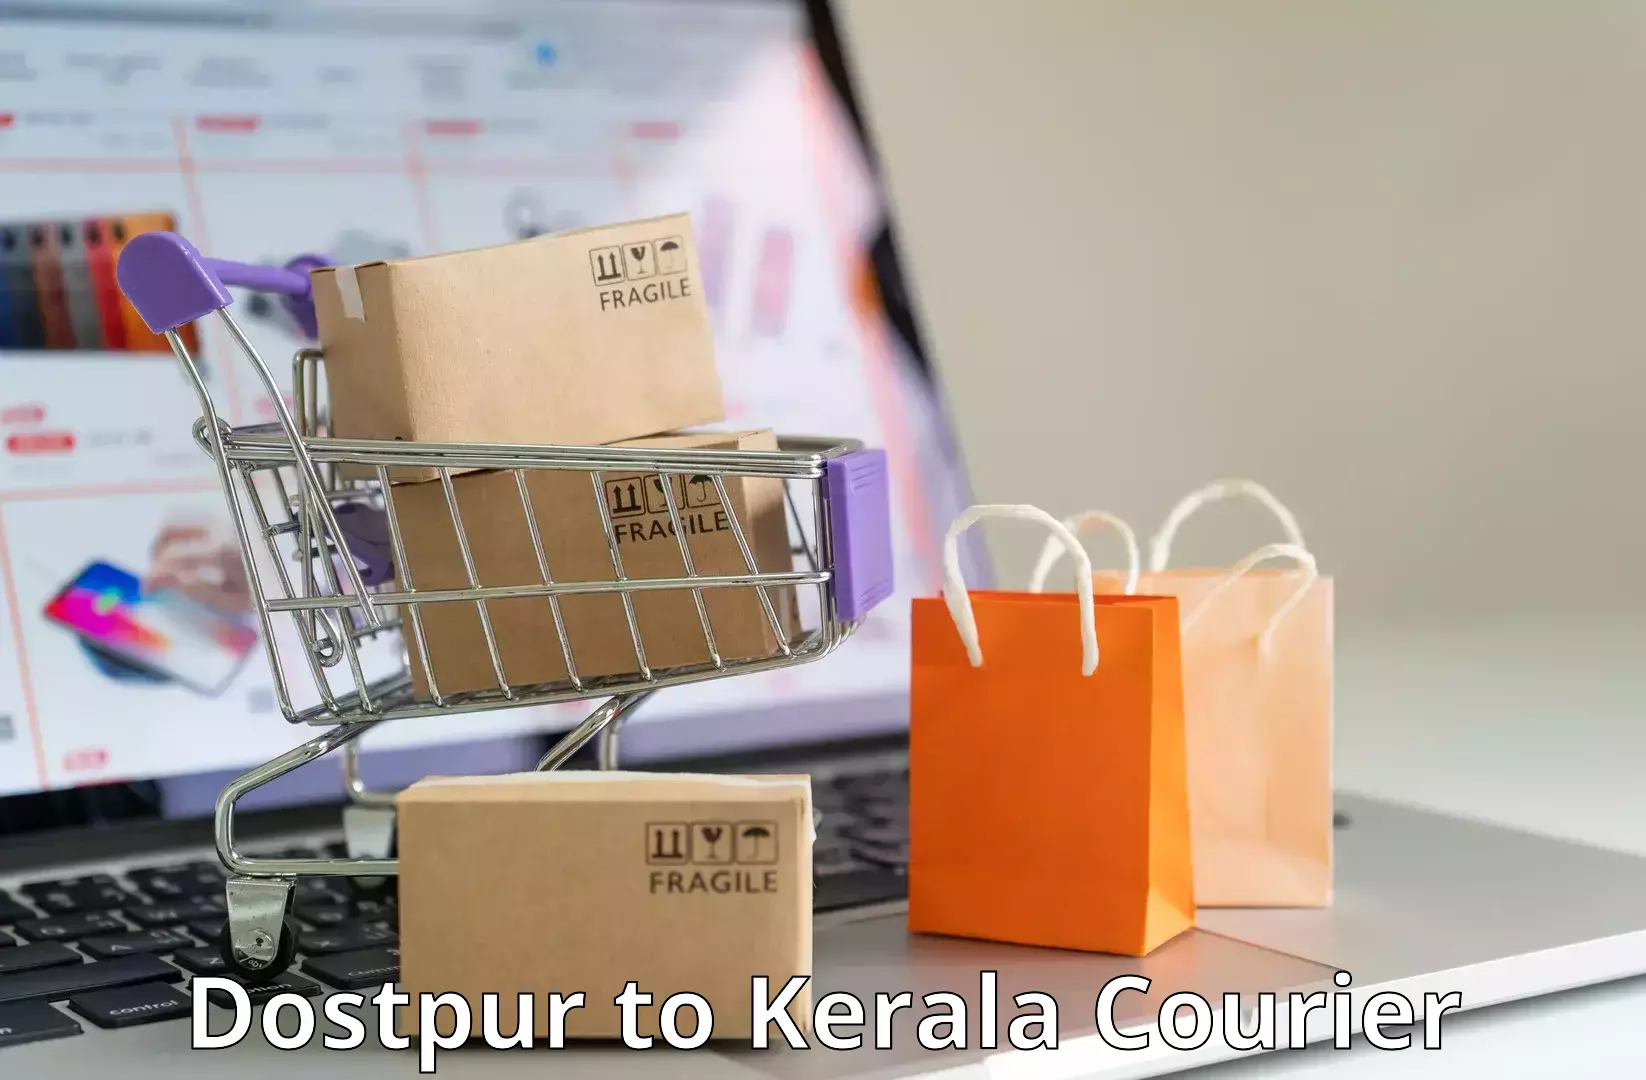 Affordable parcel service Dostpur to Kanhangad